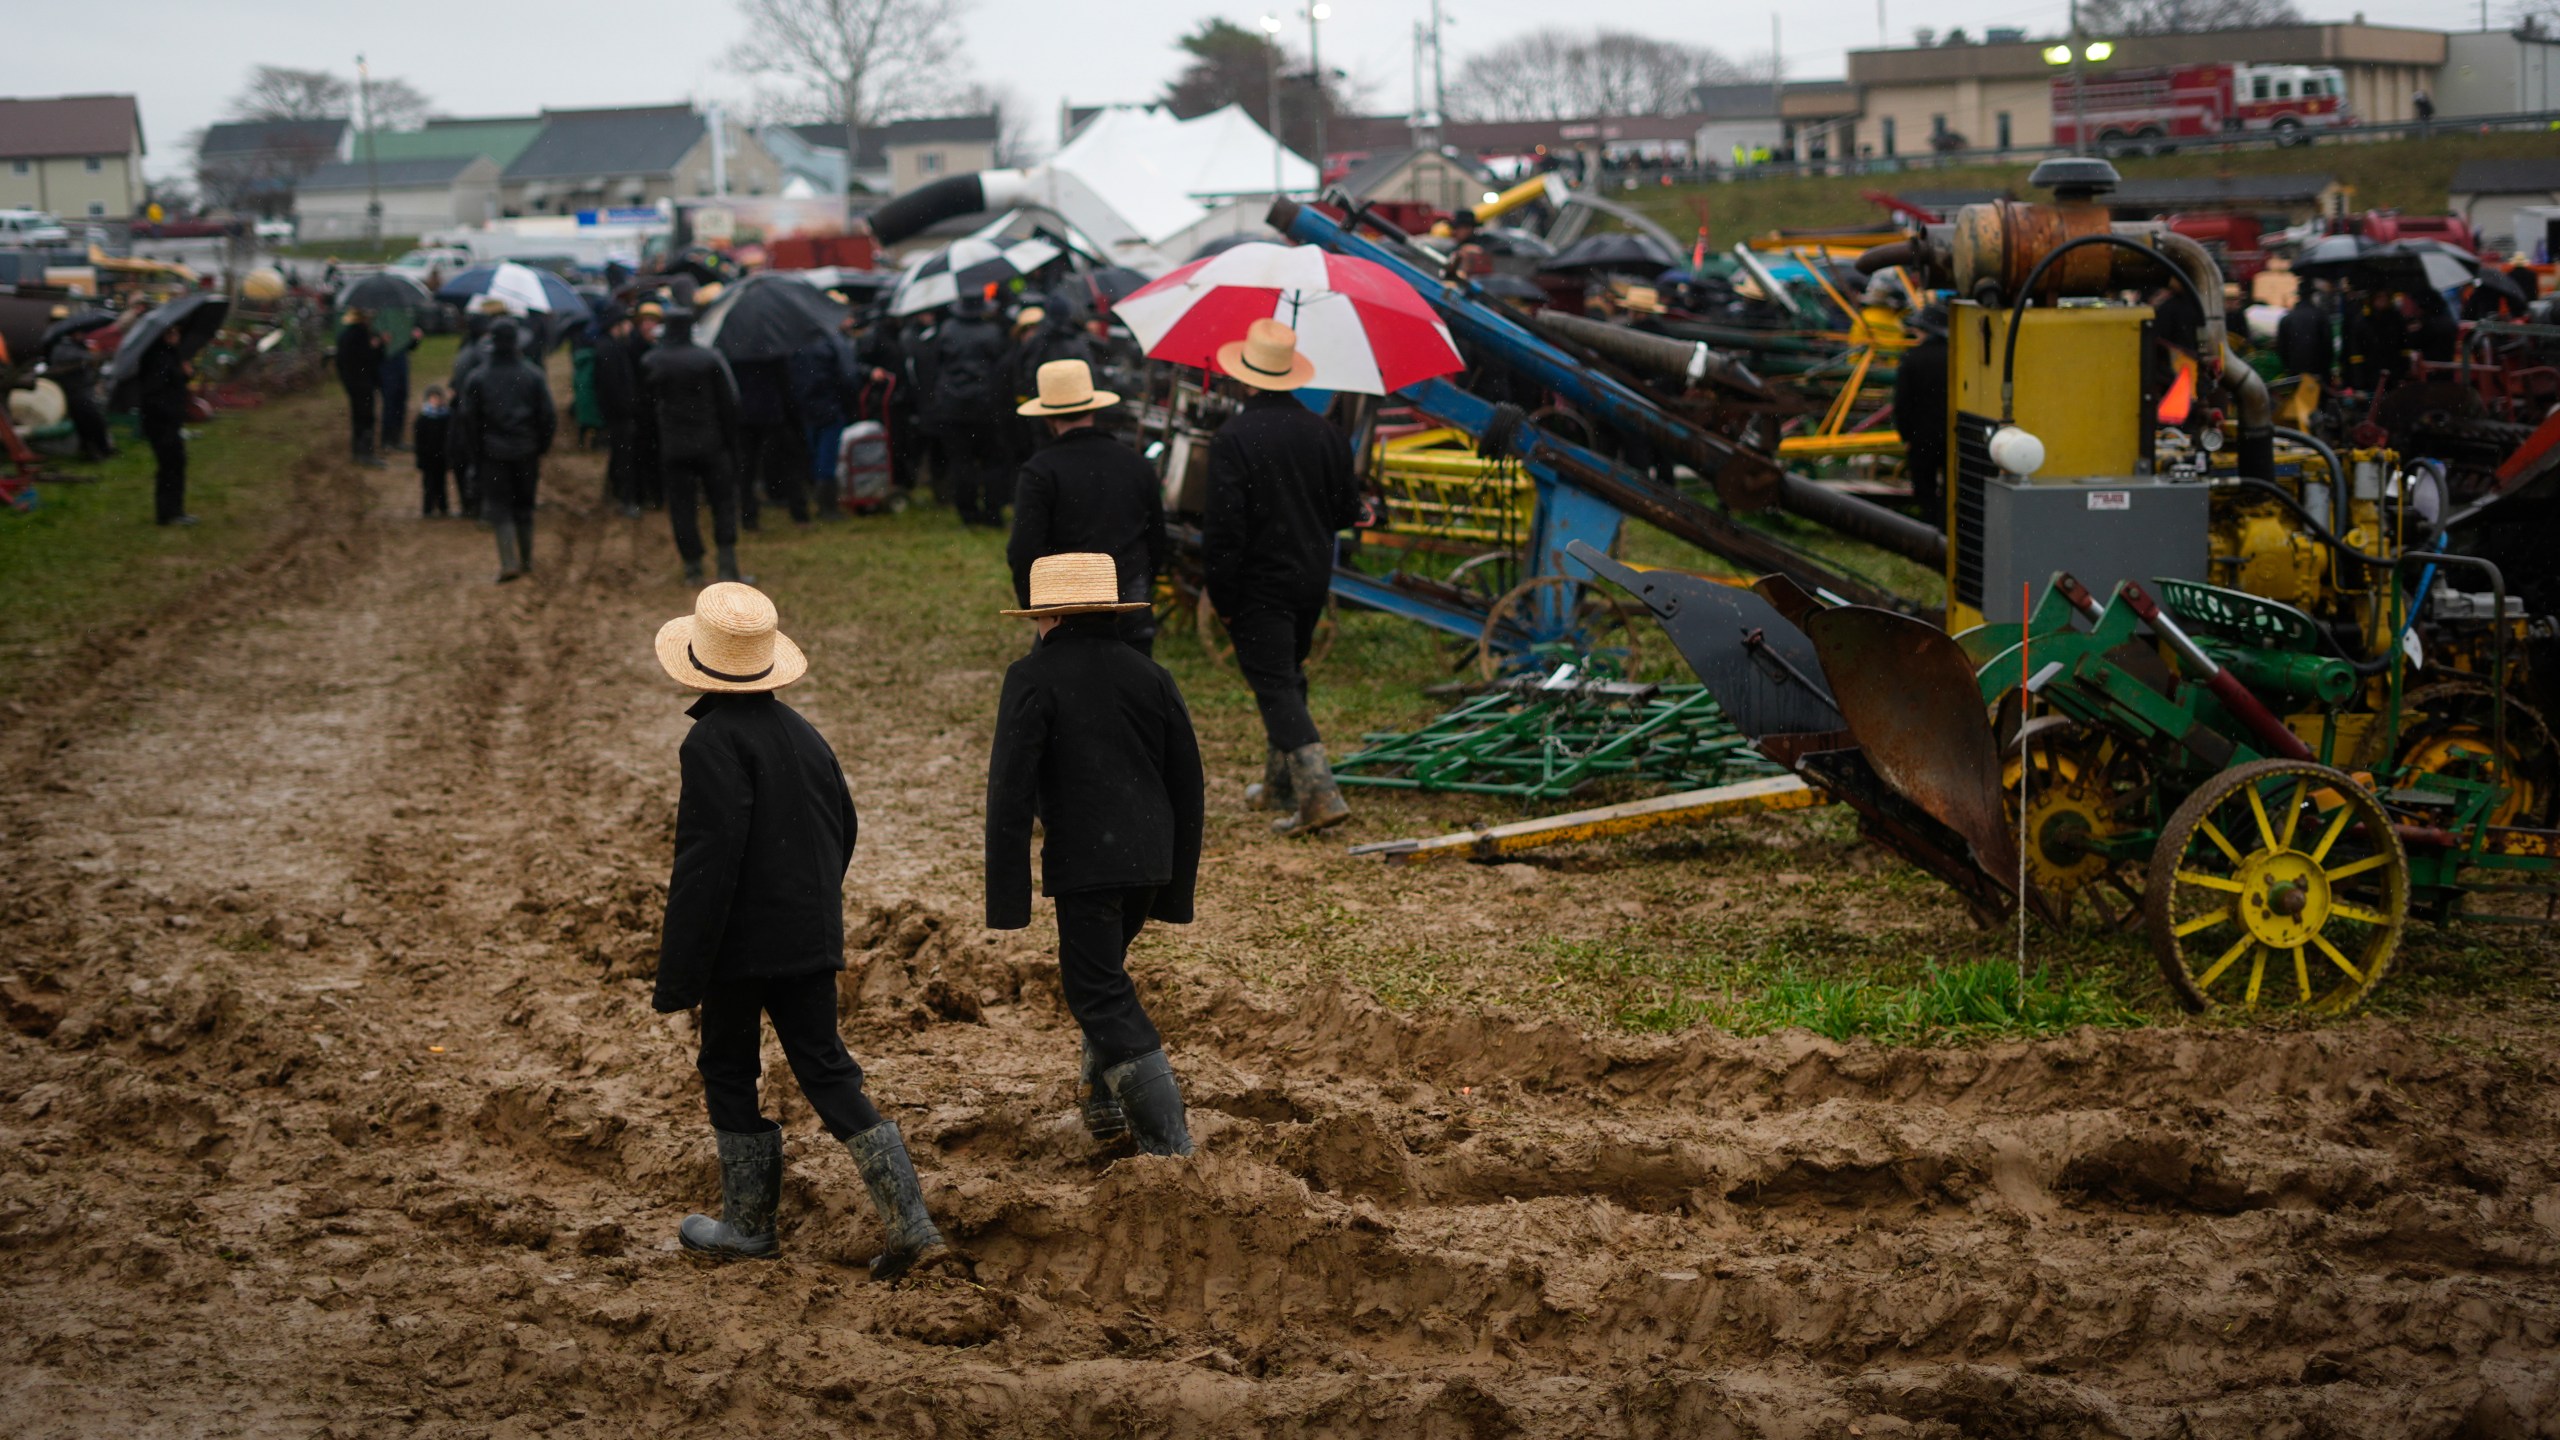 People walk in mud during an auction at the 56th annual mud sale to benefit the local fire department in Gordonville, Pa., Saturday, March 9, 2024. Mud sales are a relatively new tradition in the heart of Pennsylvania's Amish country, going back about 60 years and held in early spring as the ground begins to thaw but it's too early for much farm work. (AP Photo/Matt Rourke)